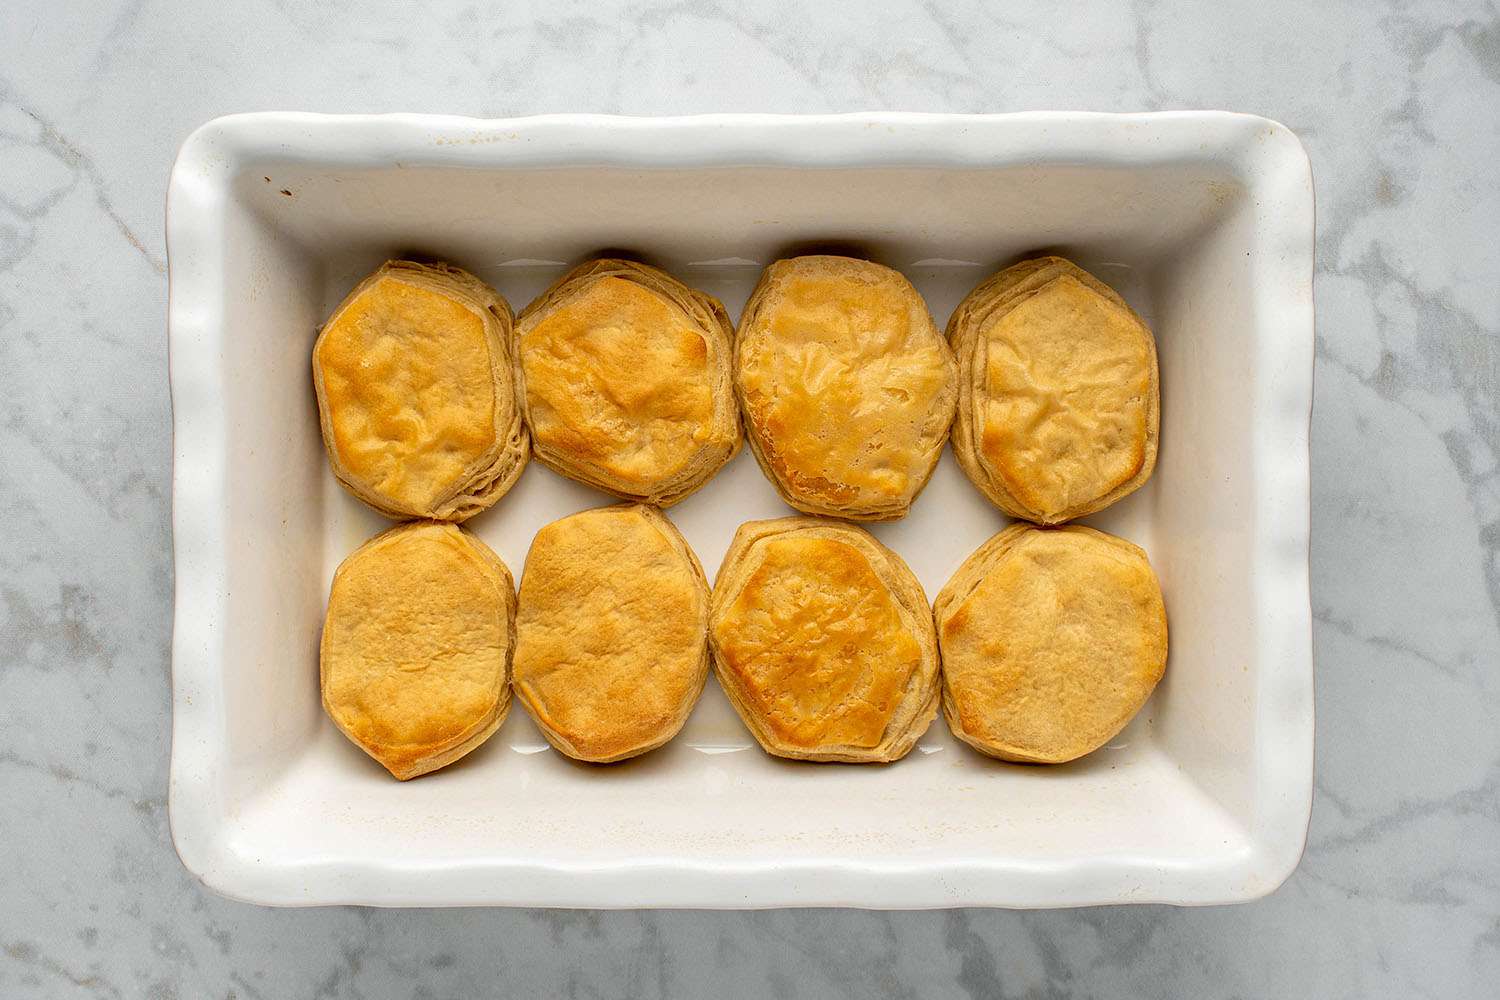 Golden-brown baked biscuits in the baking dish 